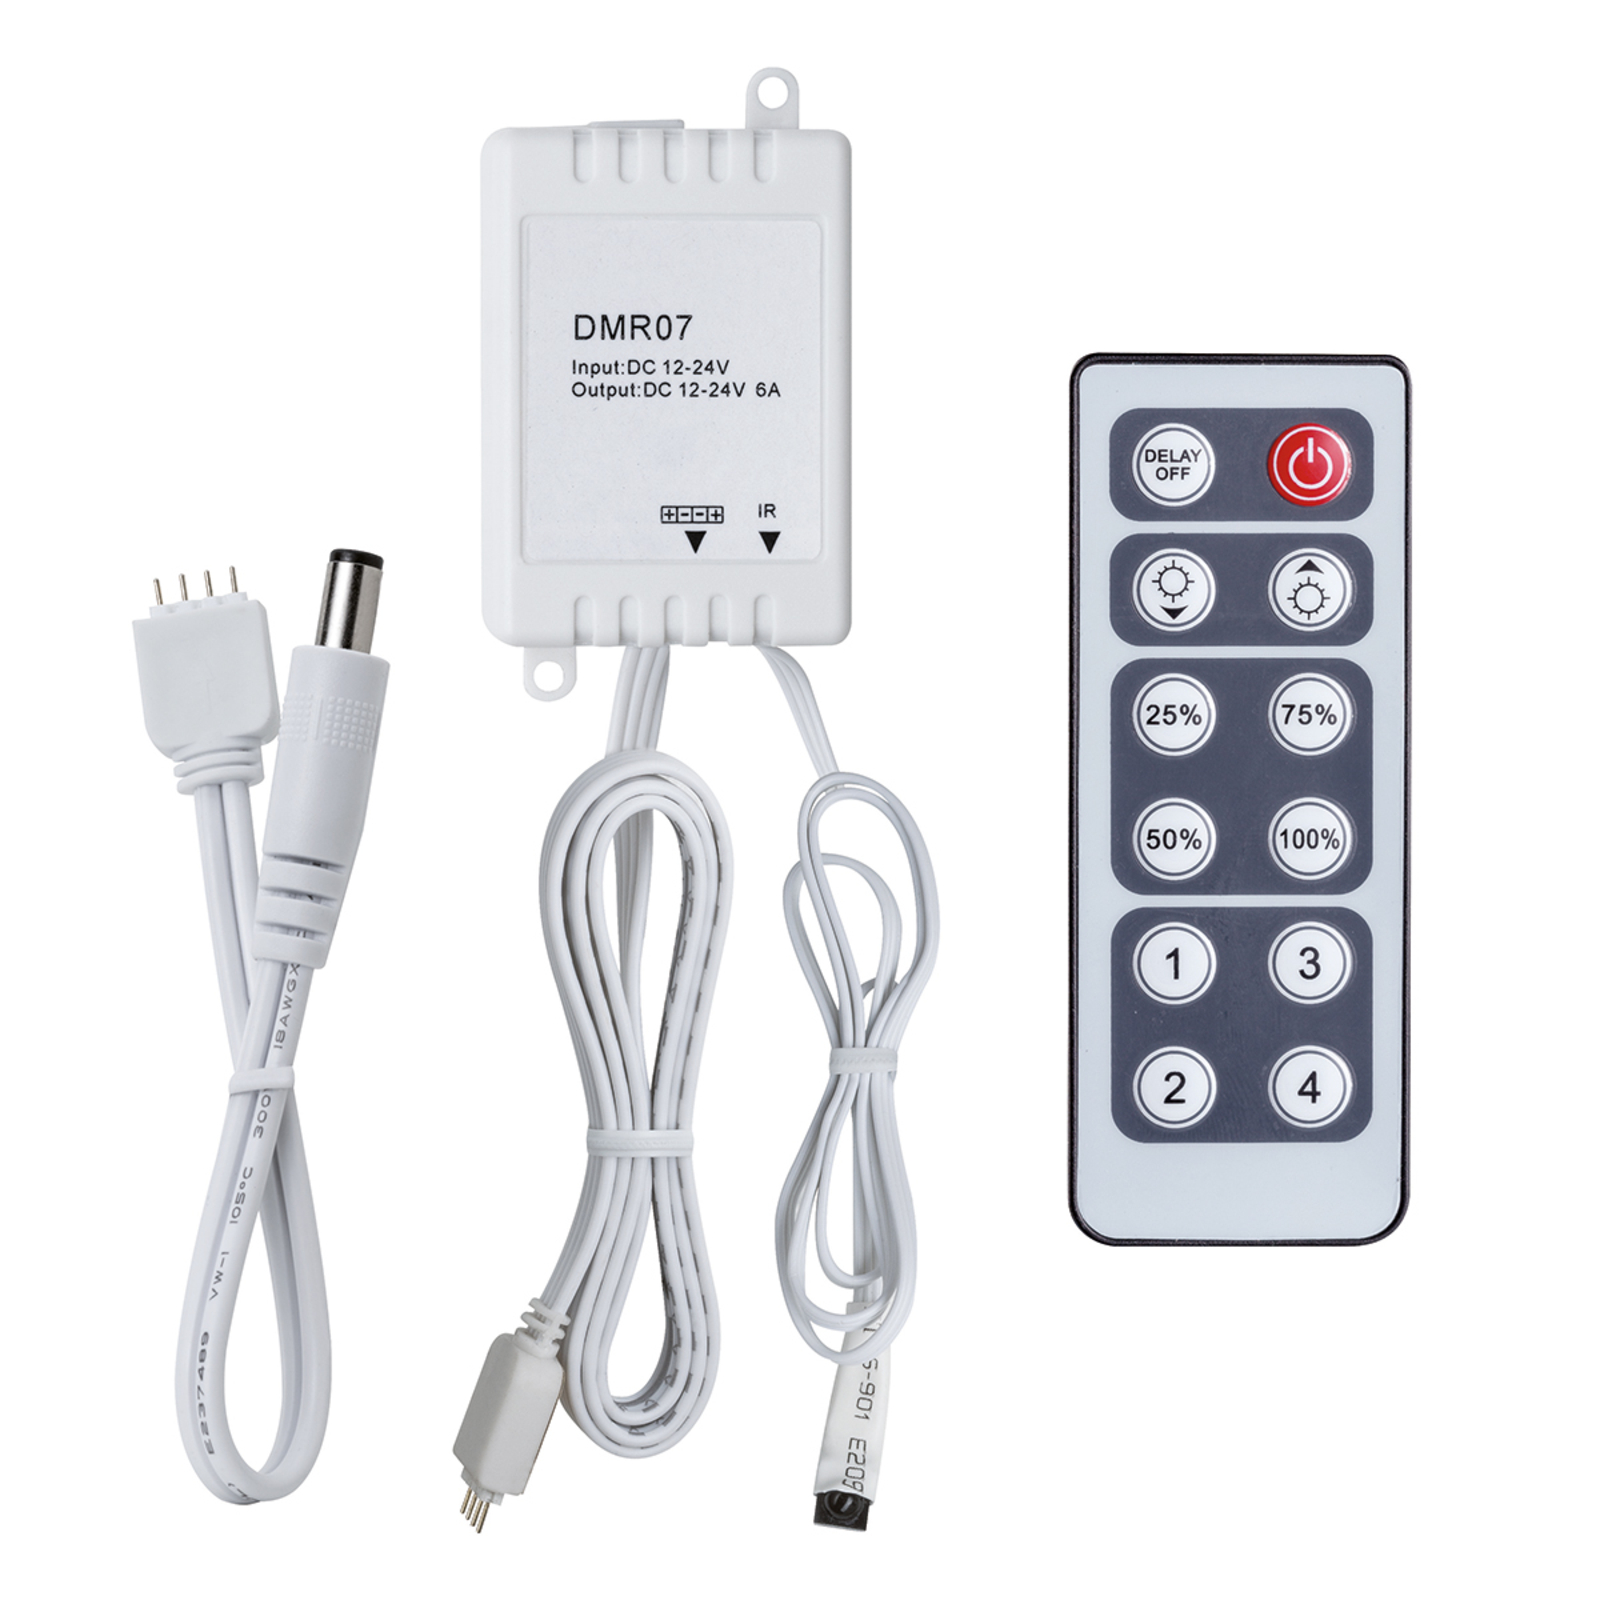 Controller for Caja LED strip system with remote